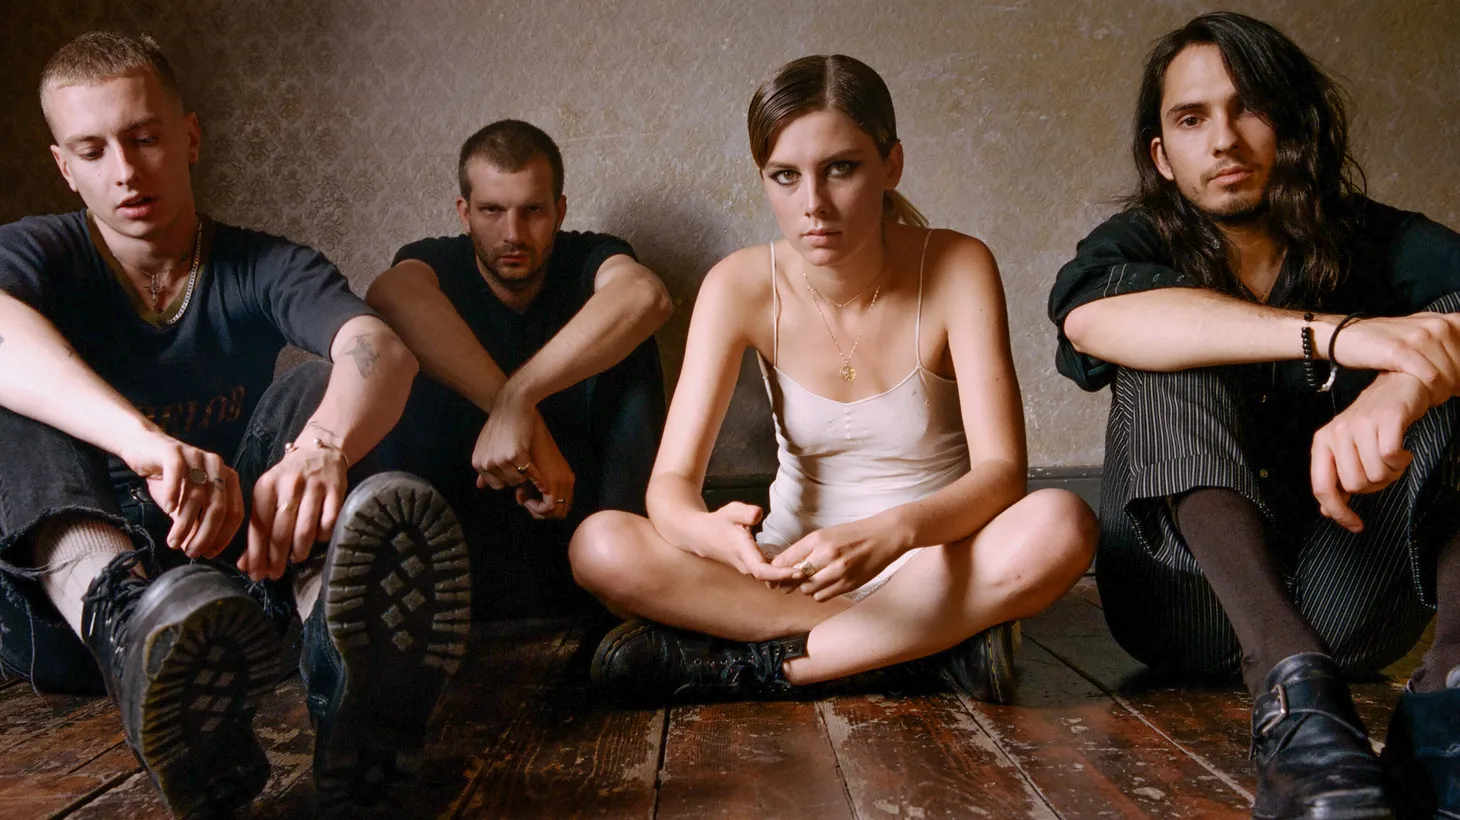 The sophomore album from London rockers Wolf Alice is a bold move forward for a band that came out of the gate with confidence and determination on their 2015 debut.